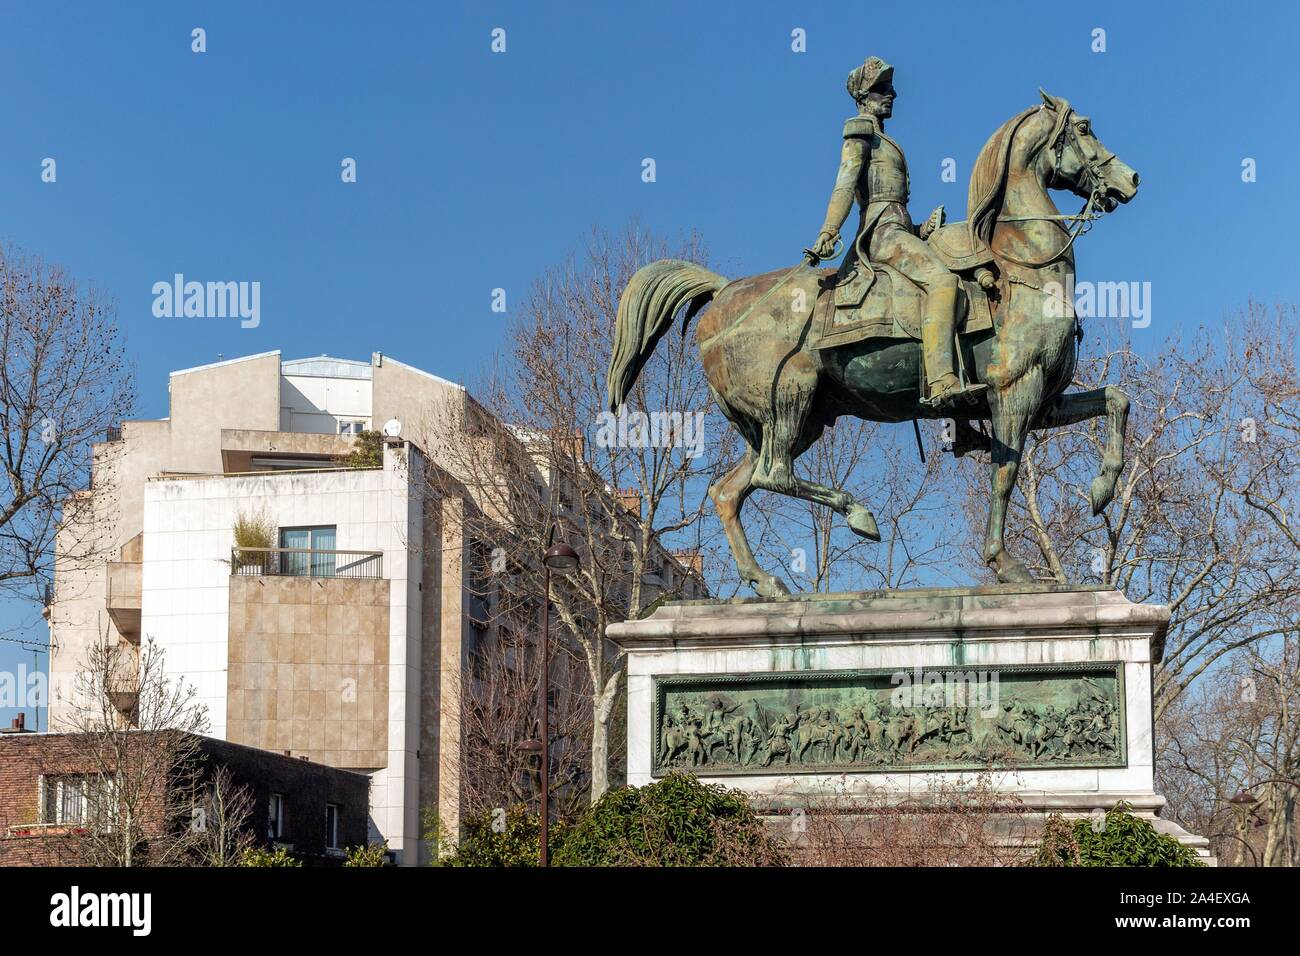 EQUESTRIAN STATUE OF FERDINAND-PHILIPPE D'ORLEANS (1810-1842), DUKE OF ORLEANS, NEUILLY-SUR-SEINE, FRANCE Stock Photo